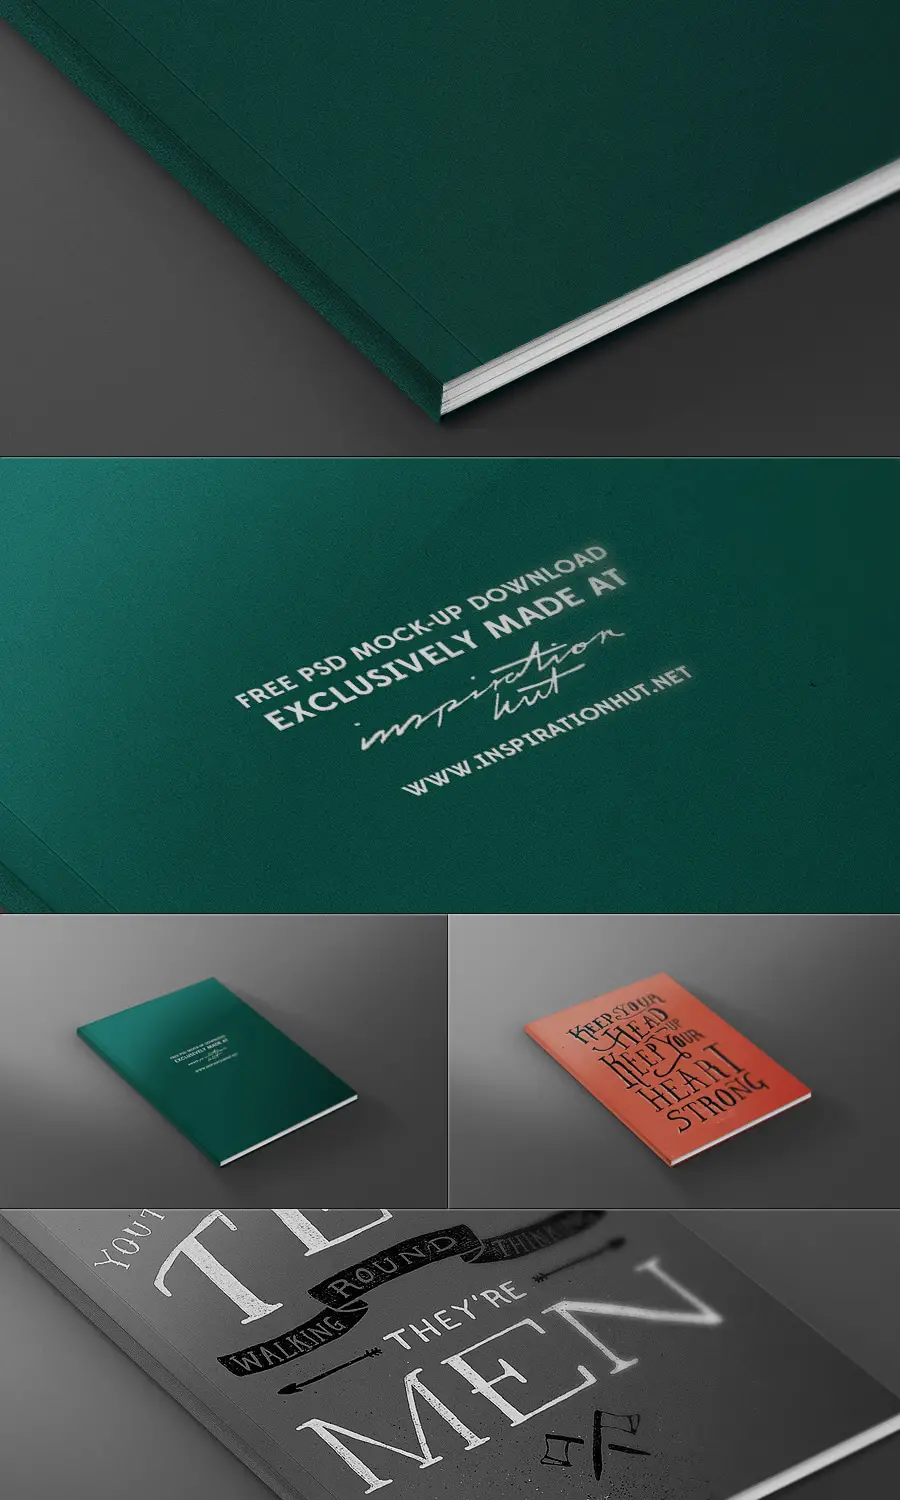 FREE Magazine Book Front Cover Mock-up Template PSD File